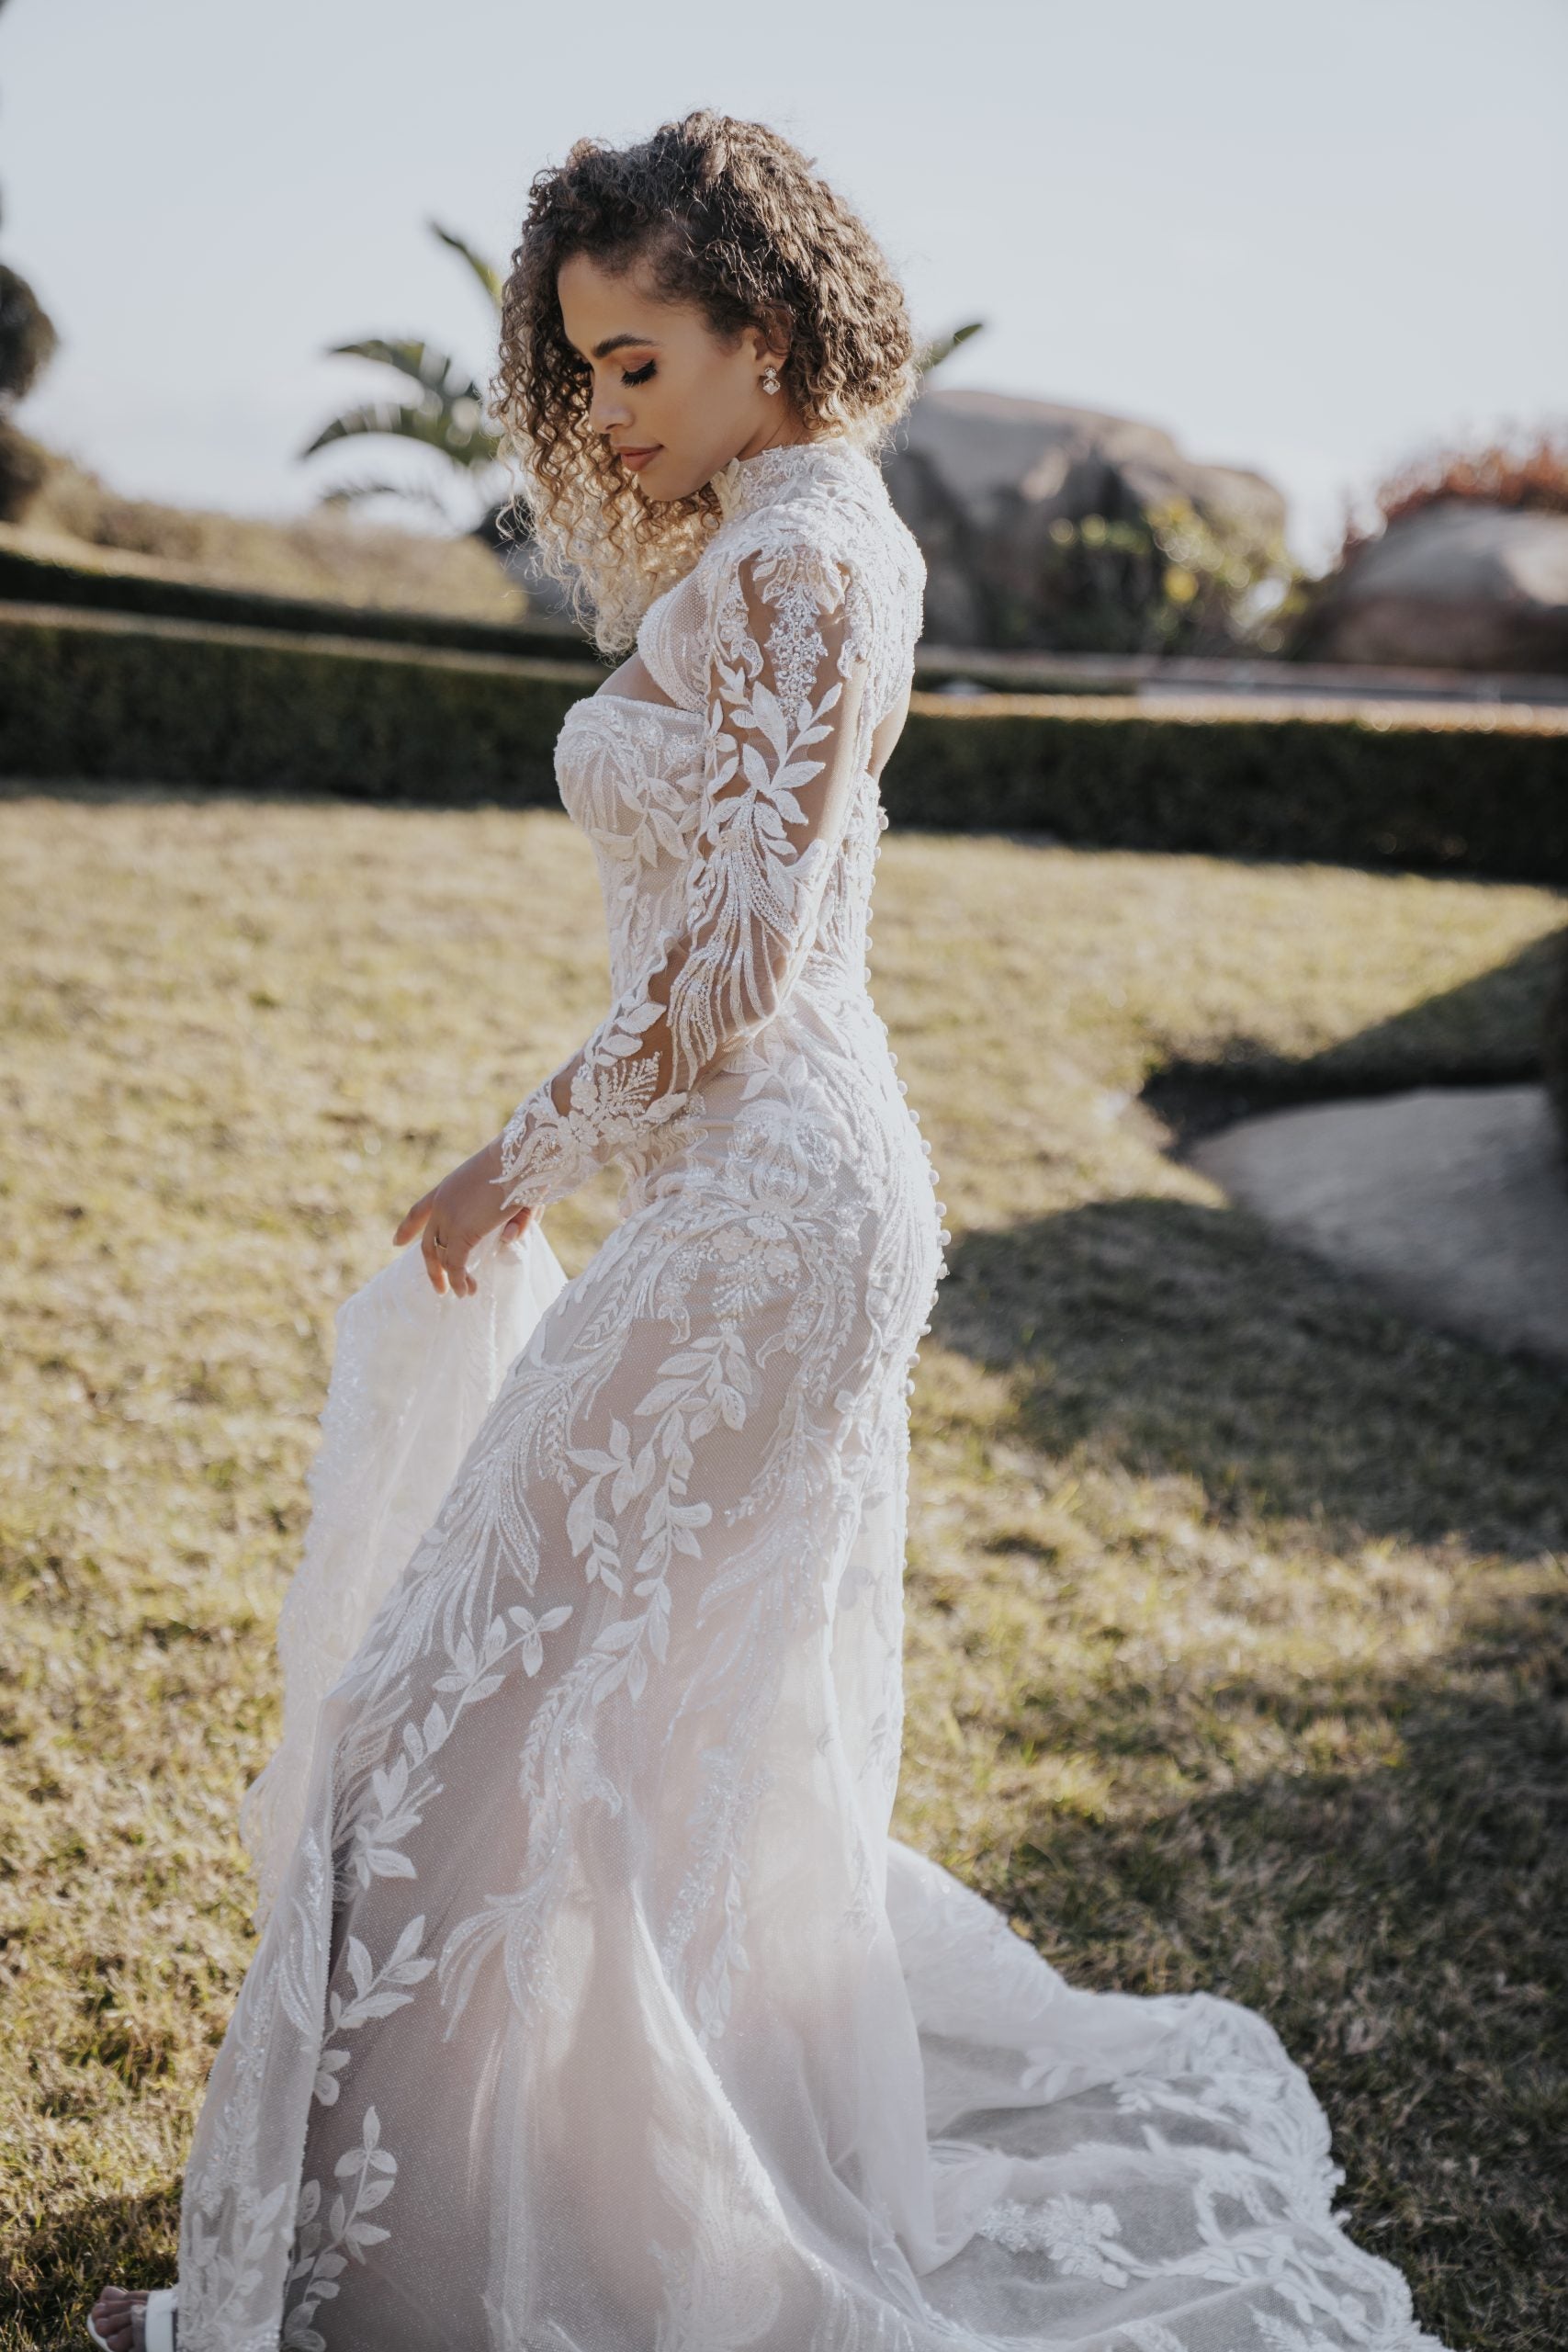 Detachable Illusion Long Sleeve Jacket by Allure Bridals - Image 2